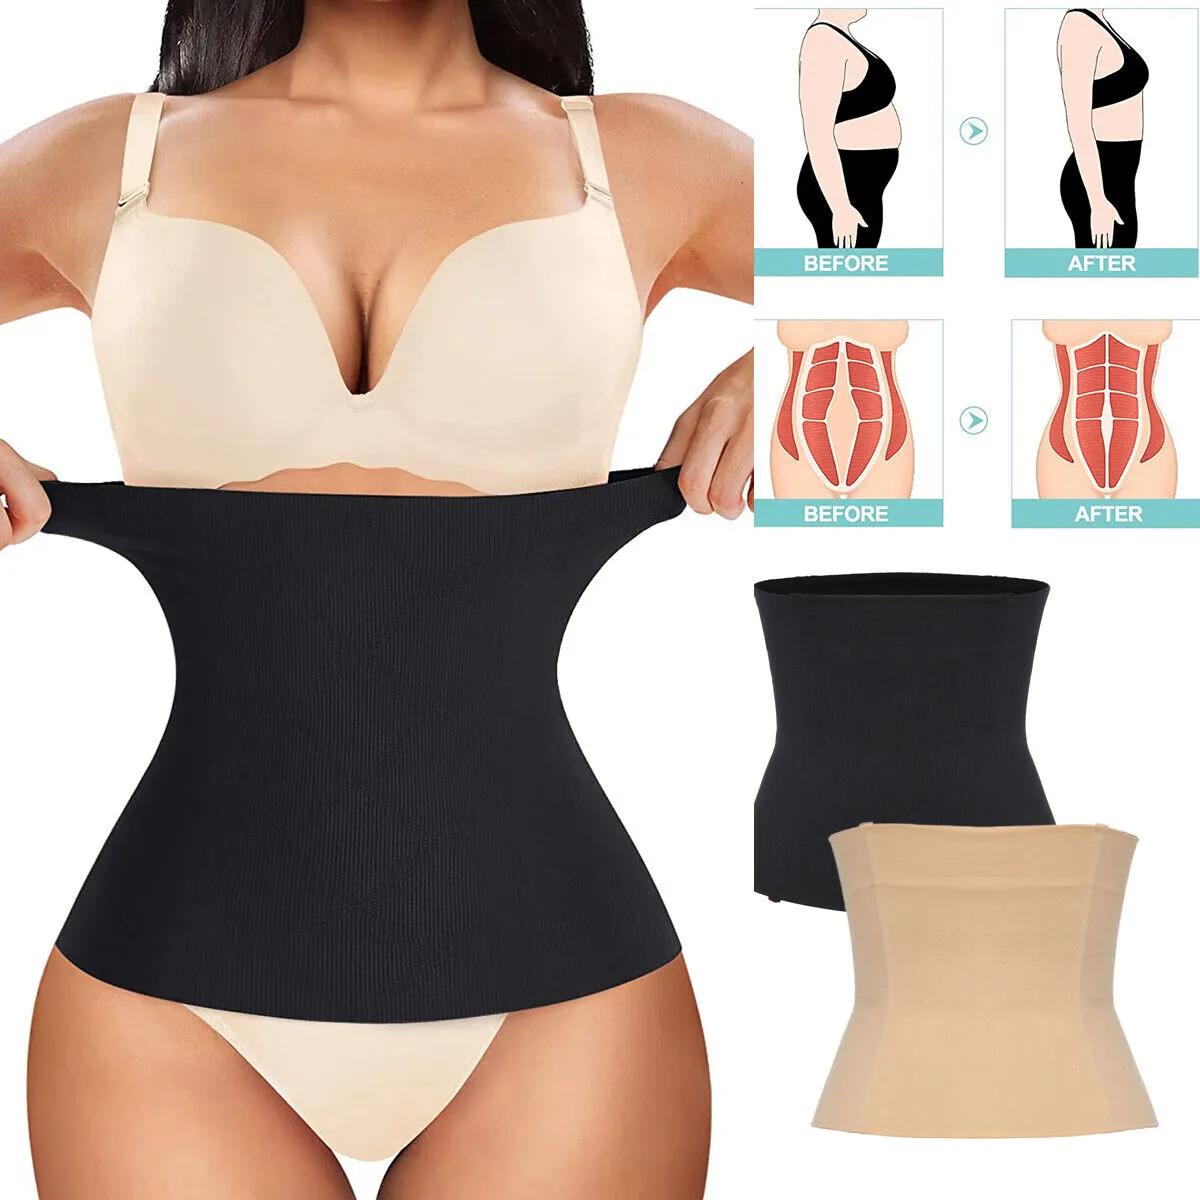 

2 IN 1 Postpartum Belly Recovery Bands Body Shaper Waist Trainer Tummy Tuck Belt Slimming Shapewear Girdle Postpartum Trainer